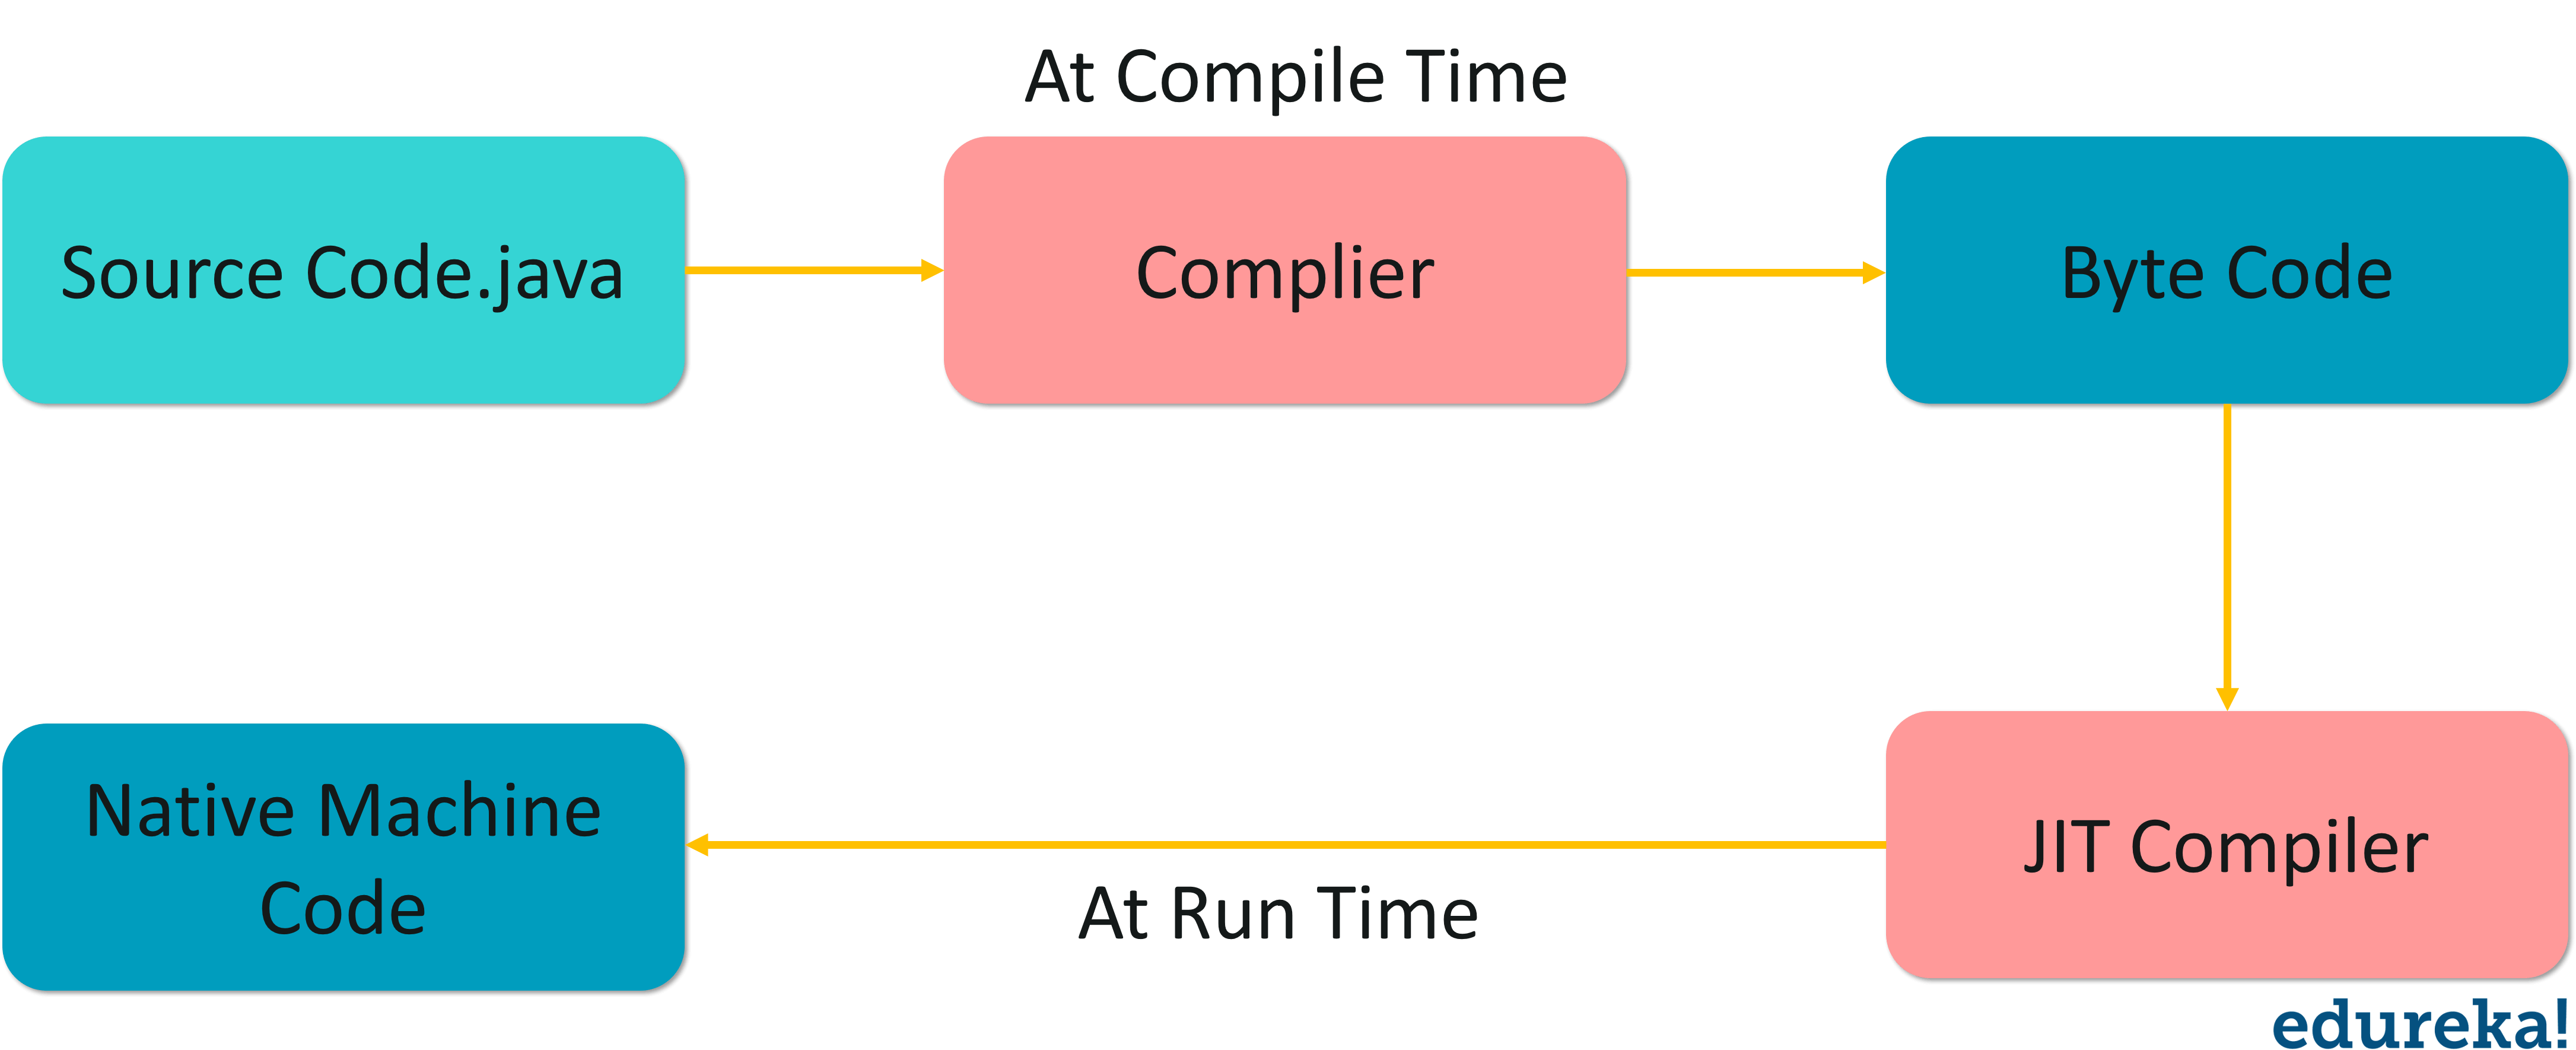 Just-In-Time compiler